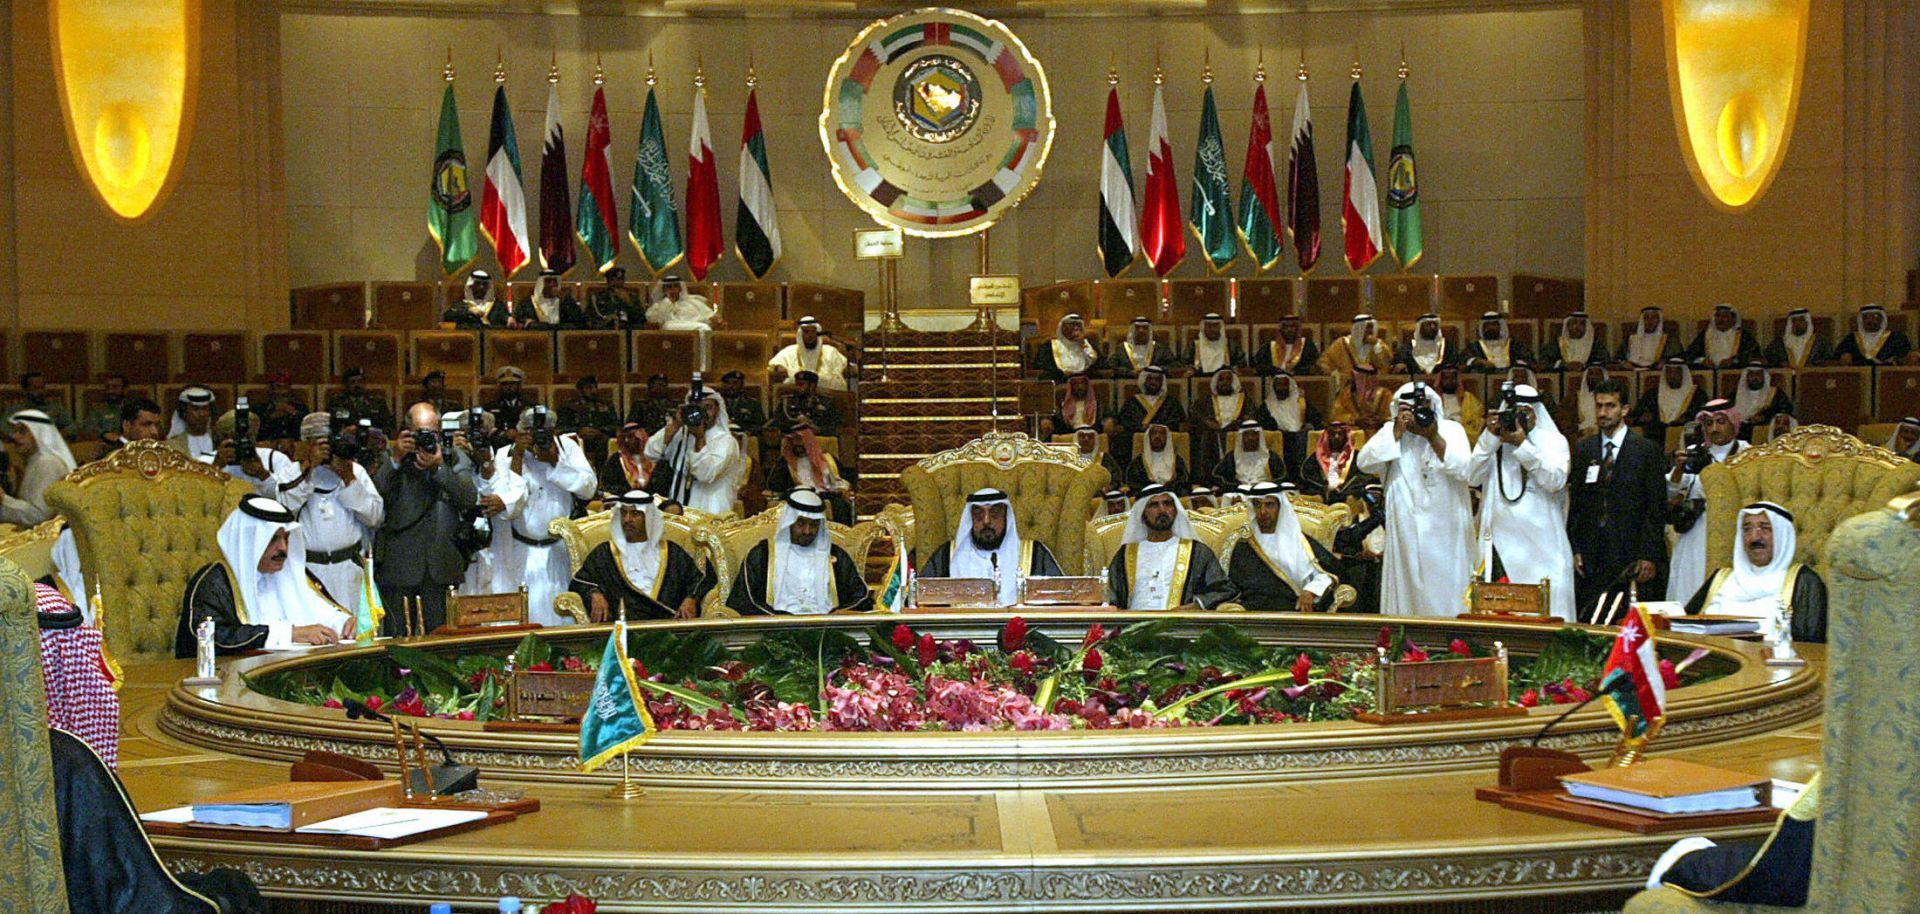 The leaders of the Gulf Cooperation Council gather for their annual summit in 2005.